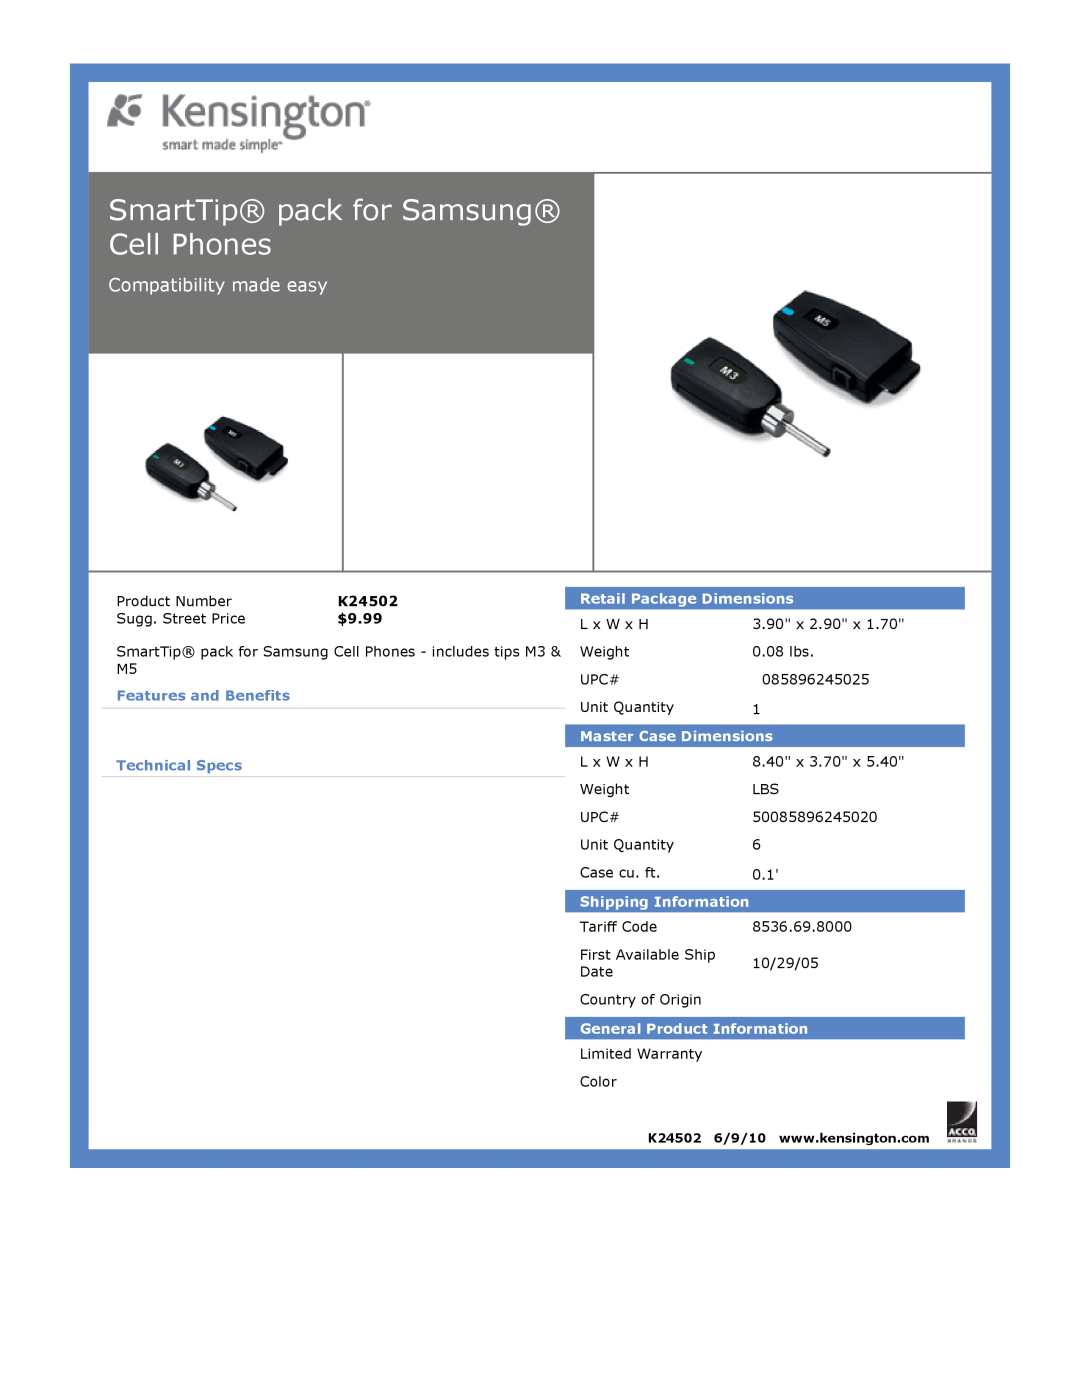 Kensington EU64325 SmartTip pack for Samsung Cell Phones, Compatibility made easy, $9.99, Retail Package Dimensions 